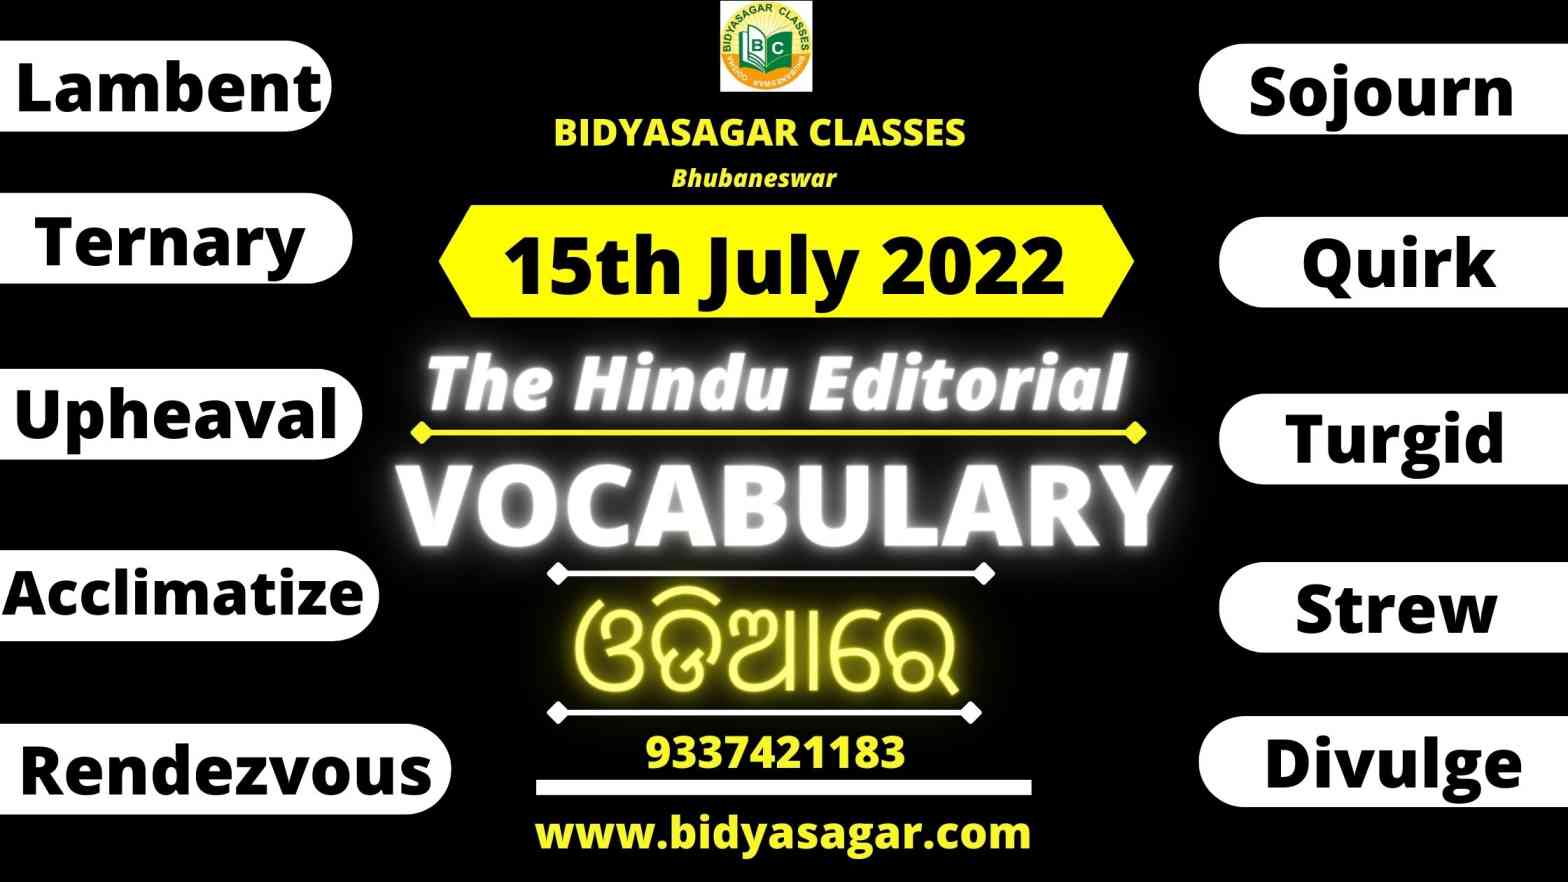 The Hindu Editorial Vocabulary of 15th July 2022